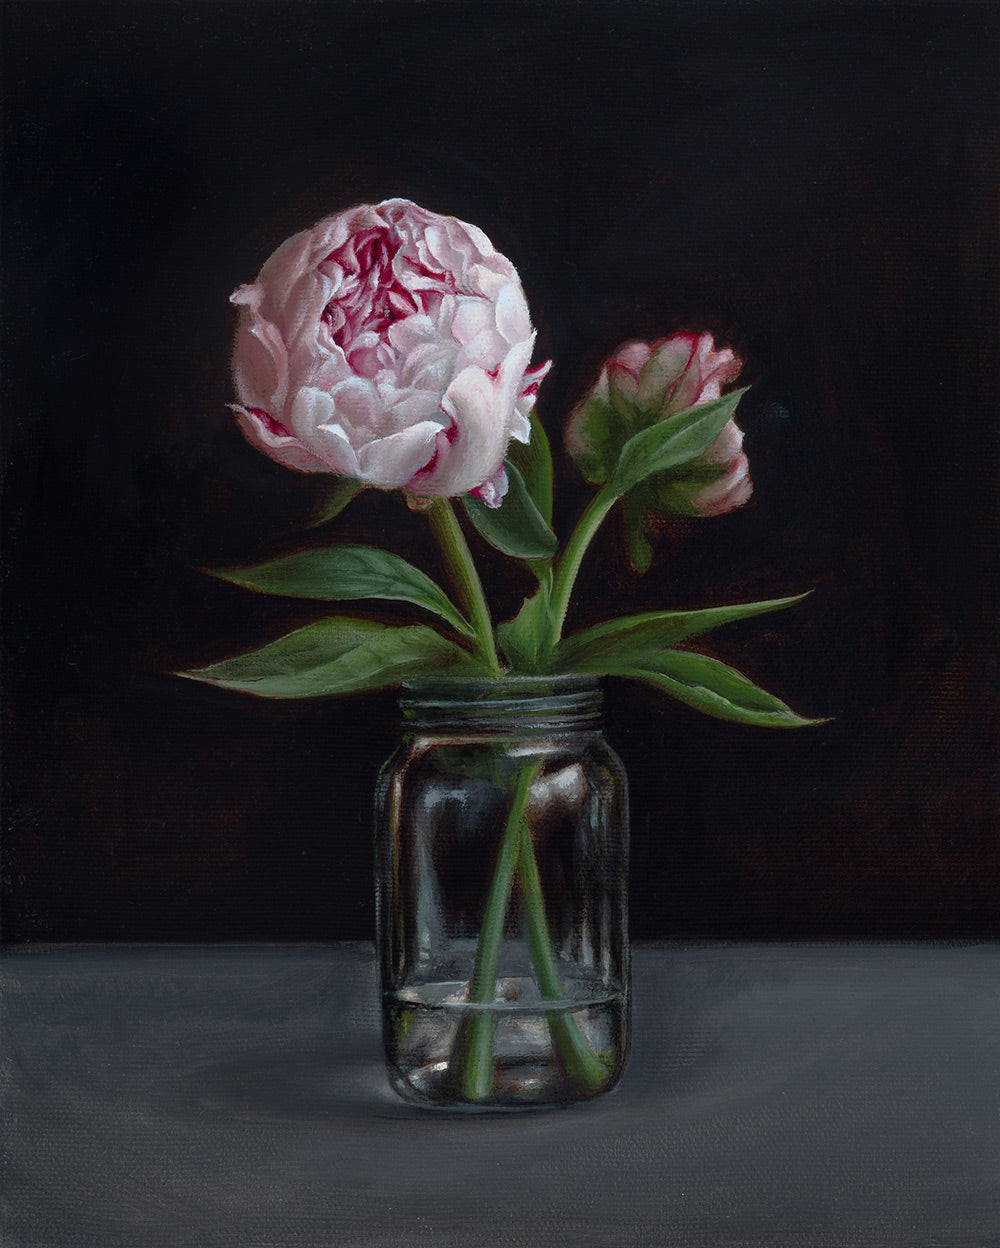 Marnie White - Peonies in Glass